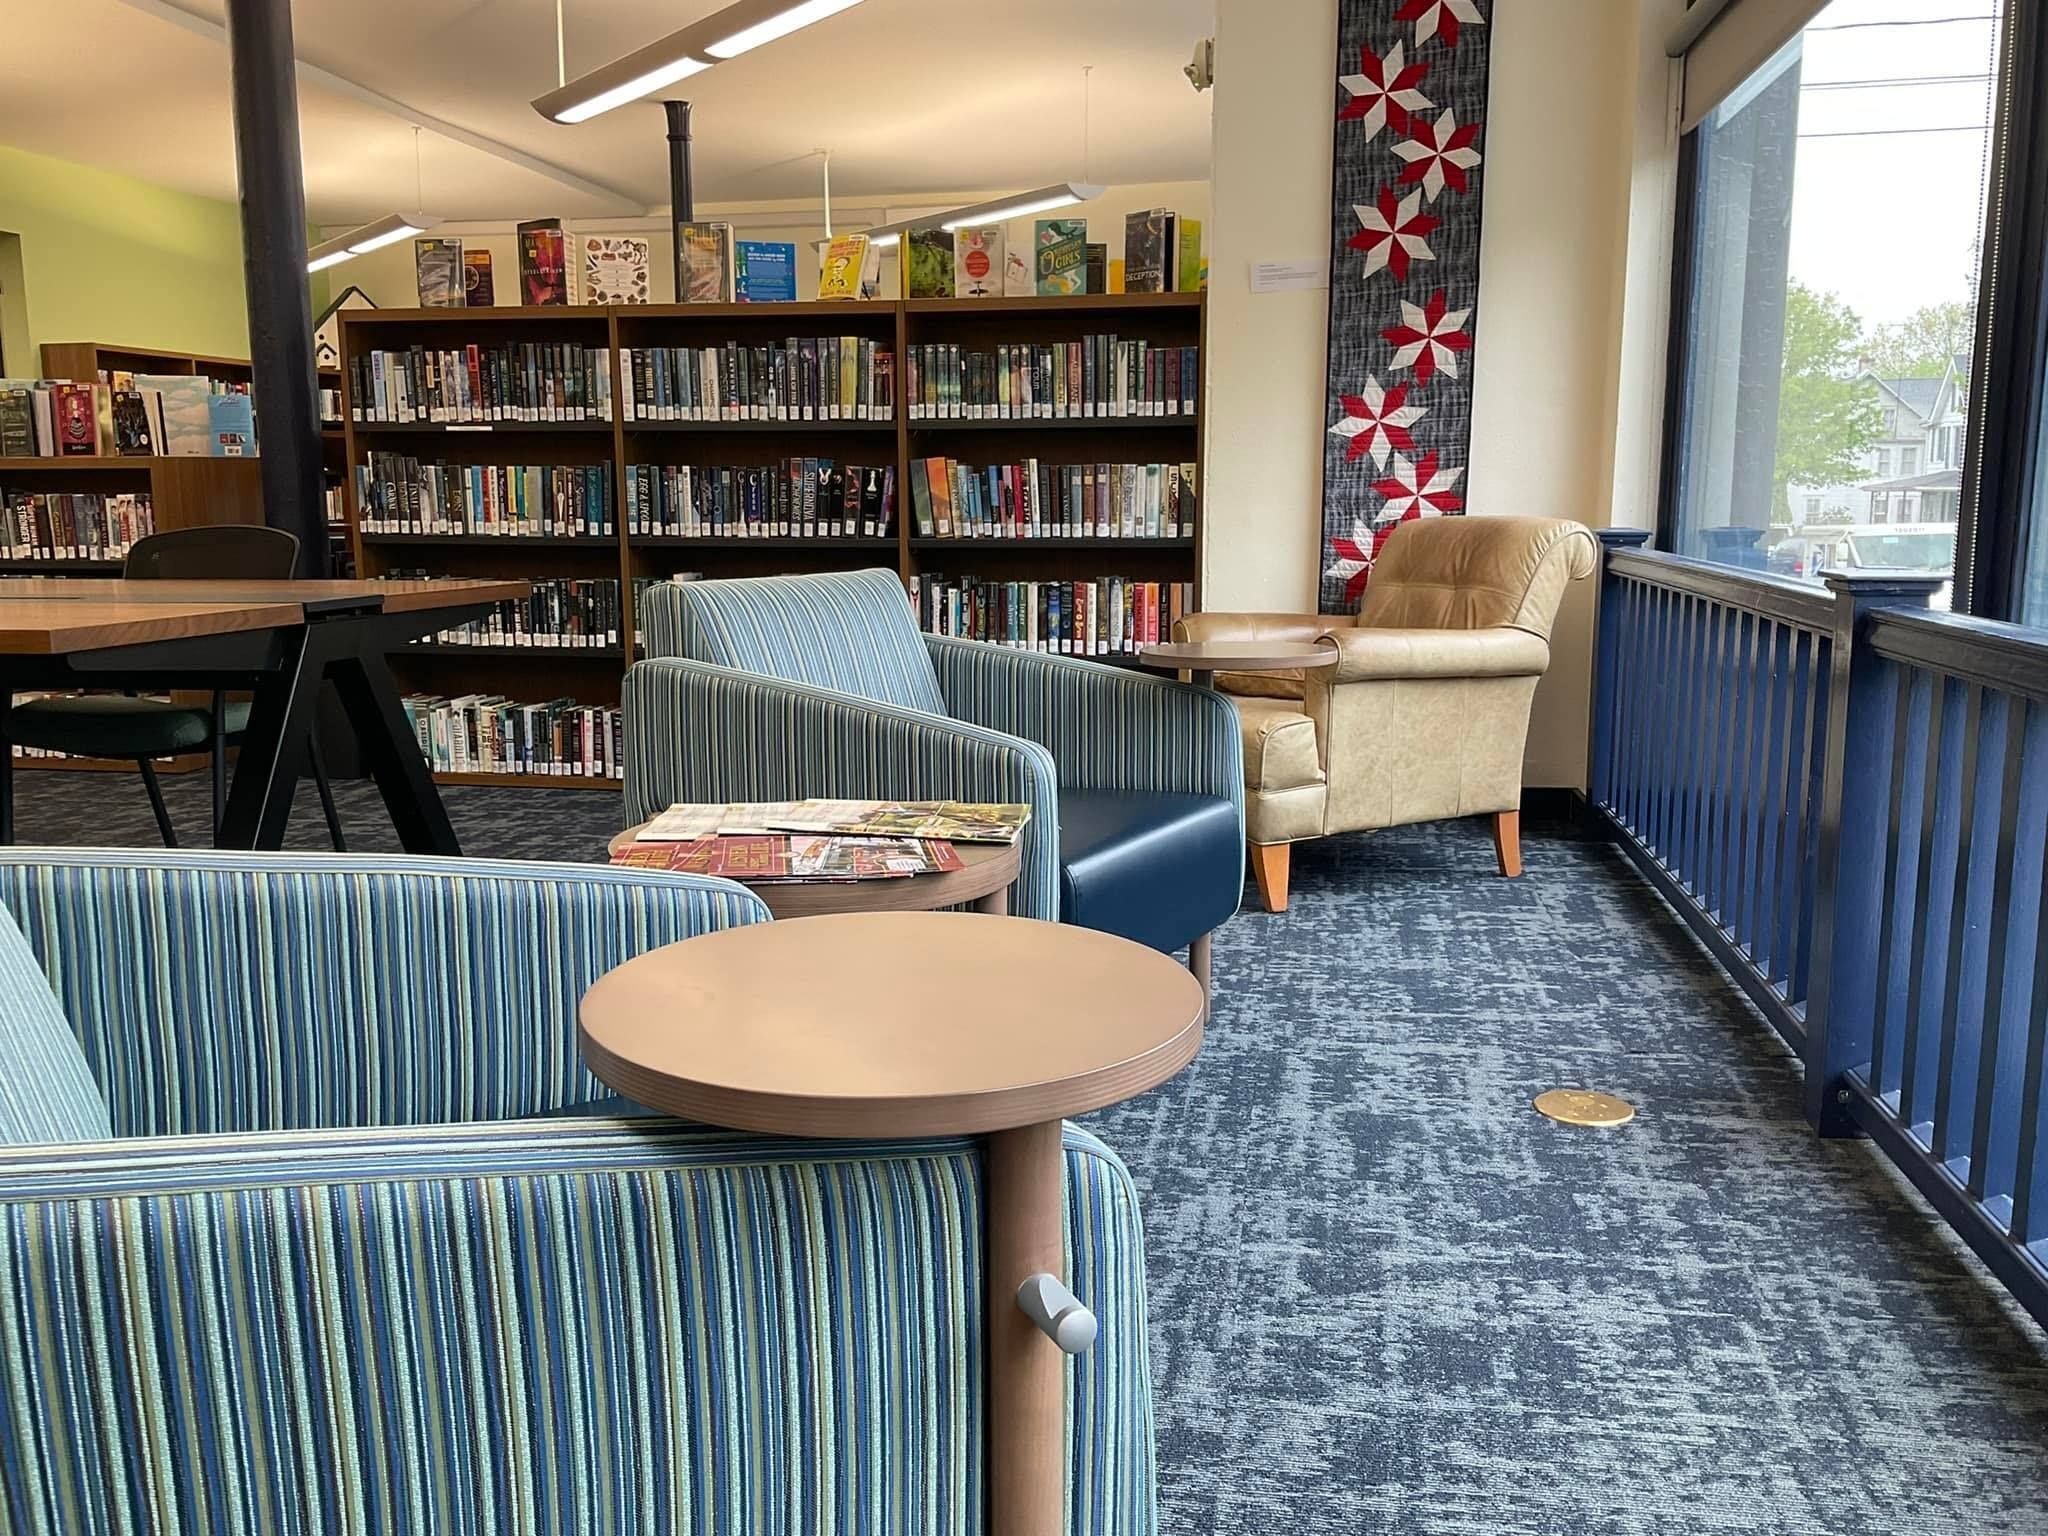 Two comfortable chairs face the bright windows in the Young Adult section.